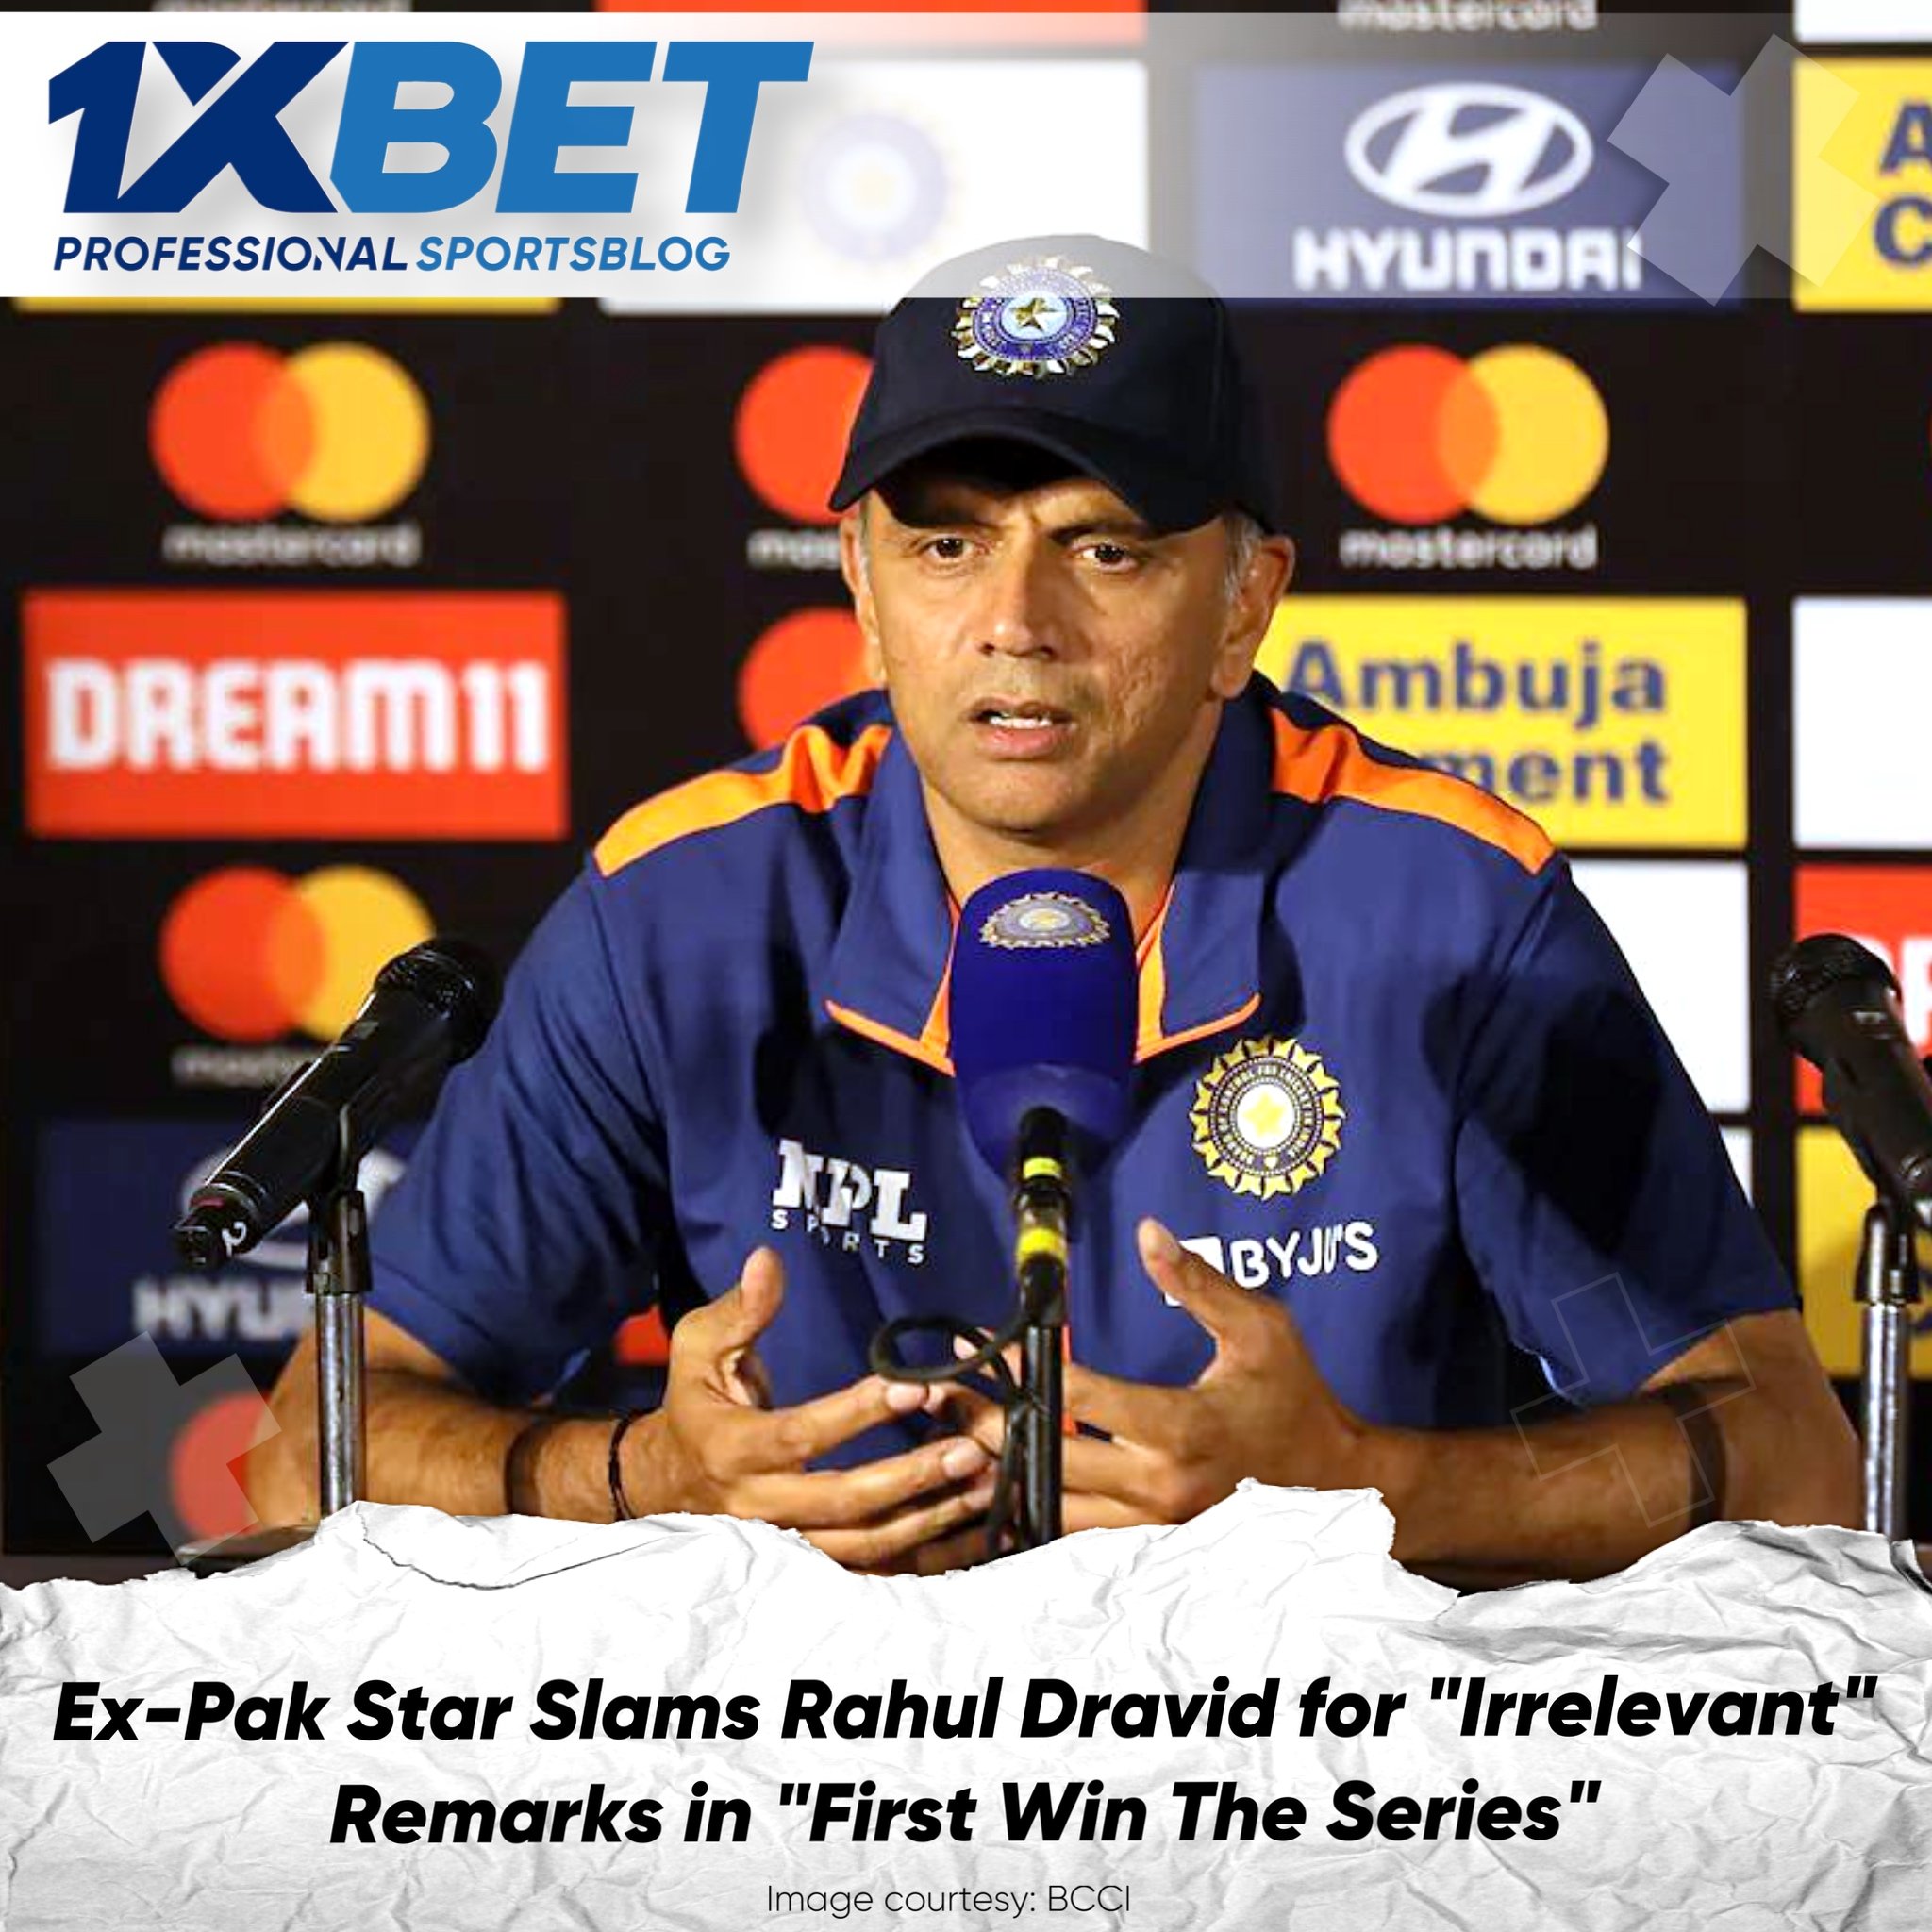 Ex-Pak Star Slams Rahul Dravid for "Irrelevant" Remarks in "First Win The Series"